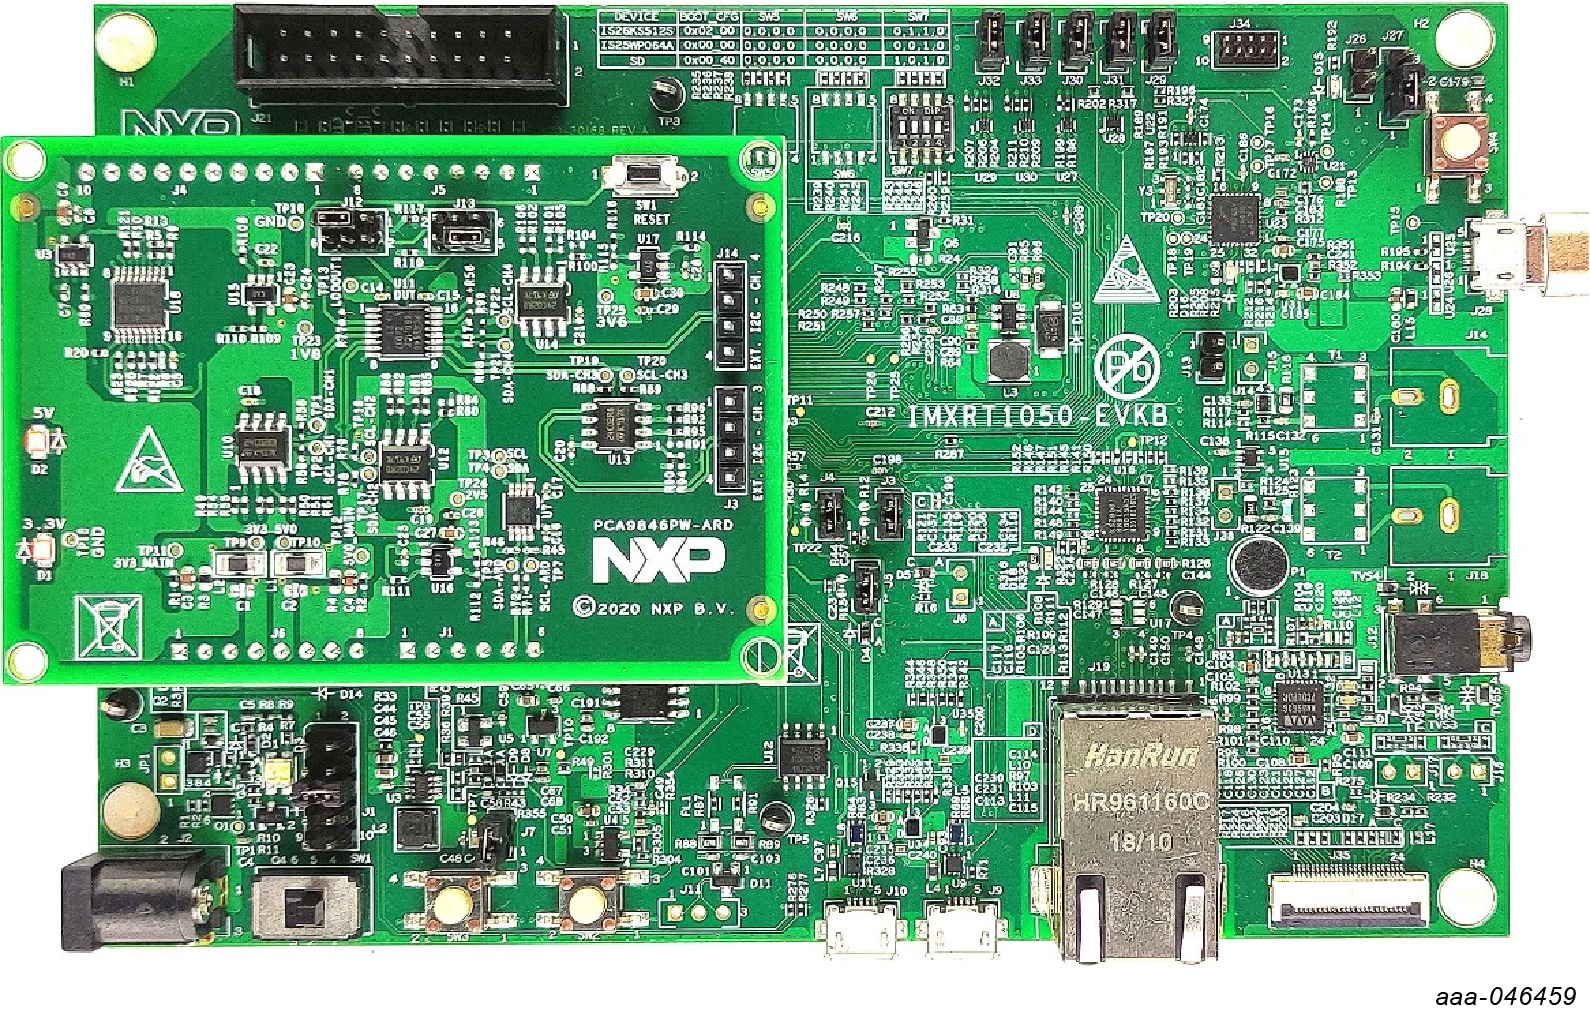 Figure 2. The assembly PCA9846PW-ARD daughter board / IMXRT1050 EVK board operation